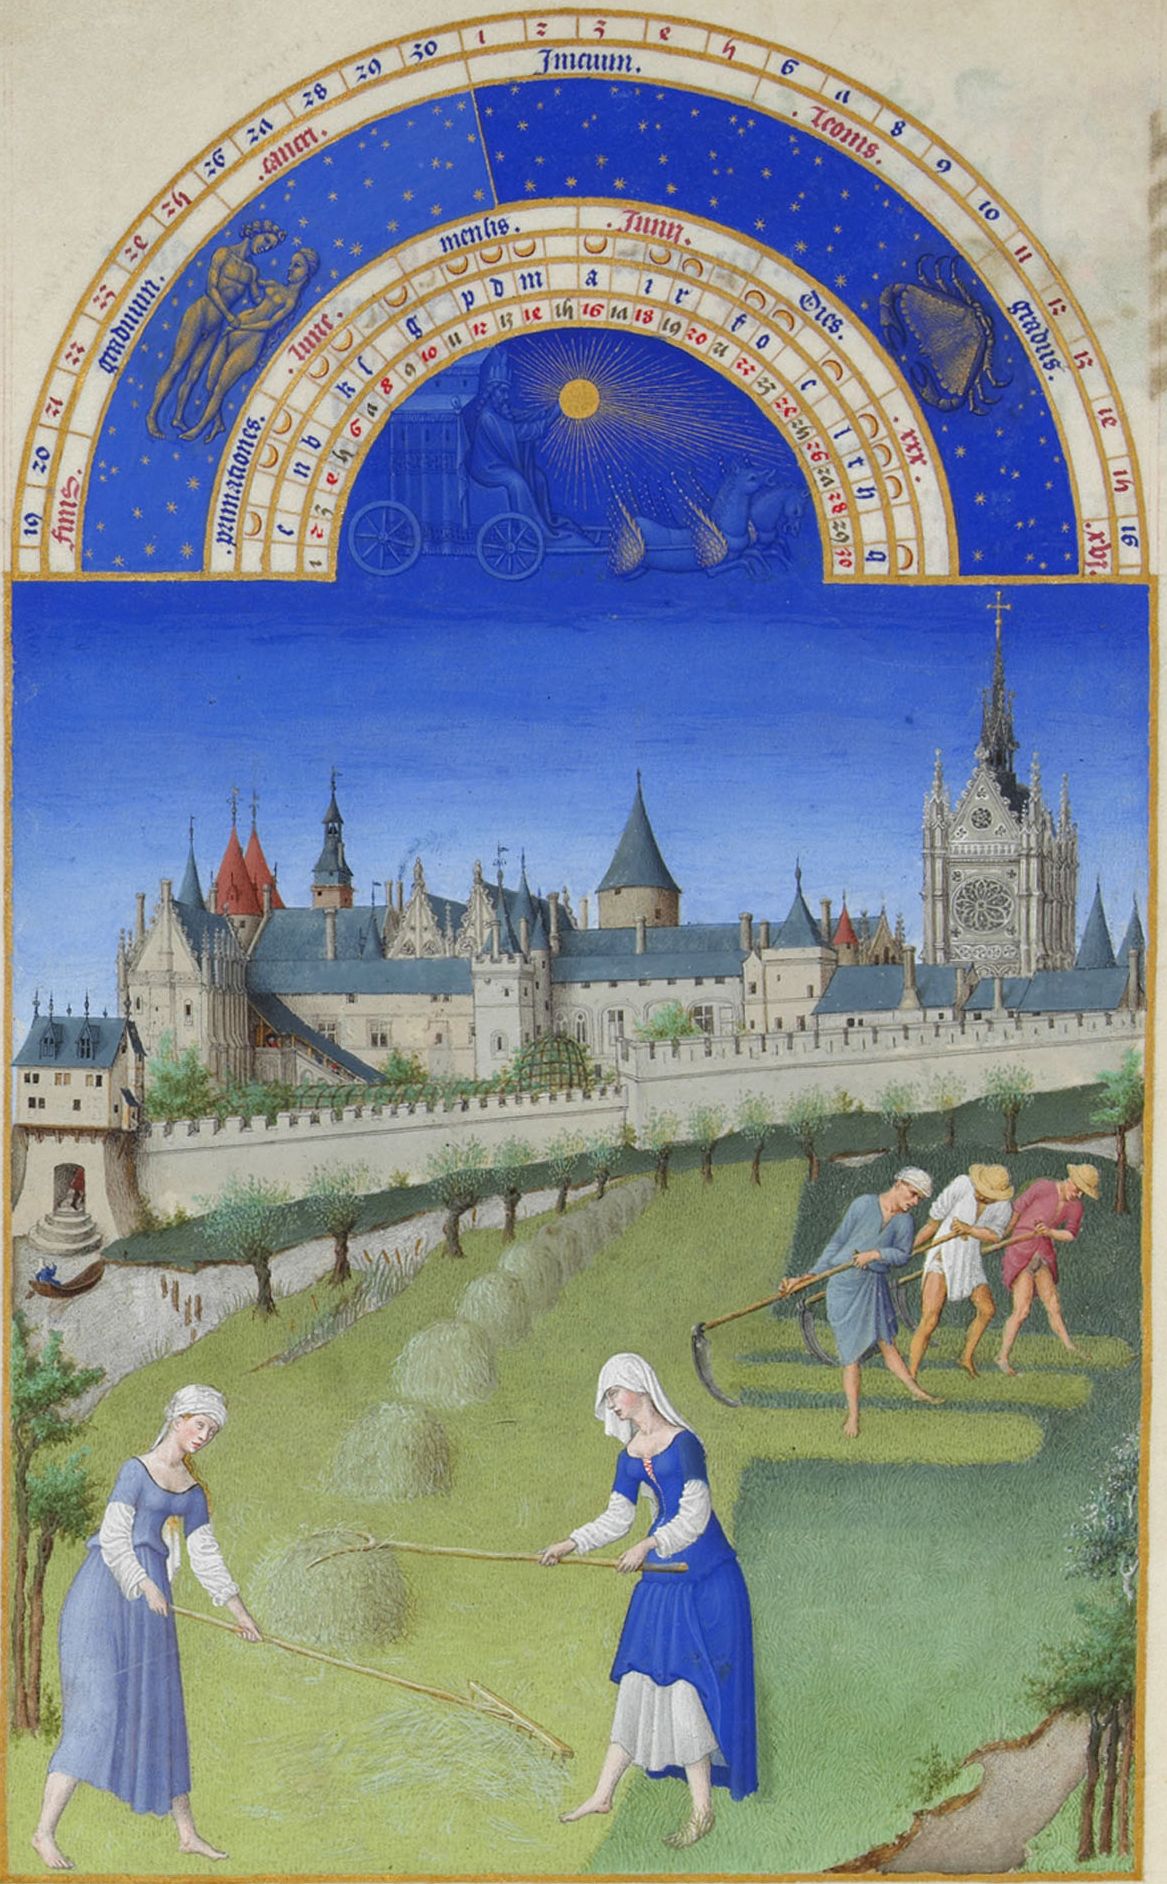 Limbourg Brothers, "The Book of Hours." Haymaking. Place - Paris, Zhyuif meadow on the island, close to the Cité.